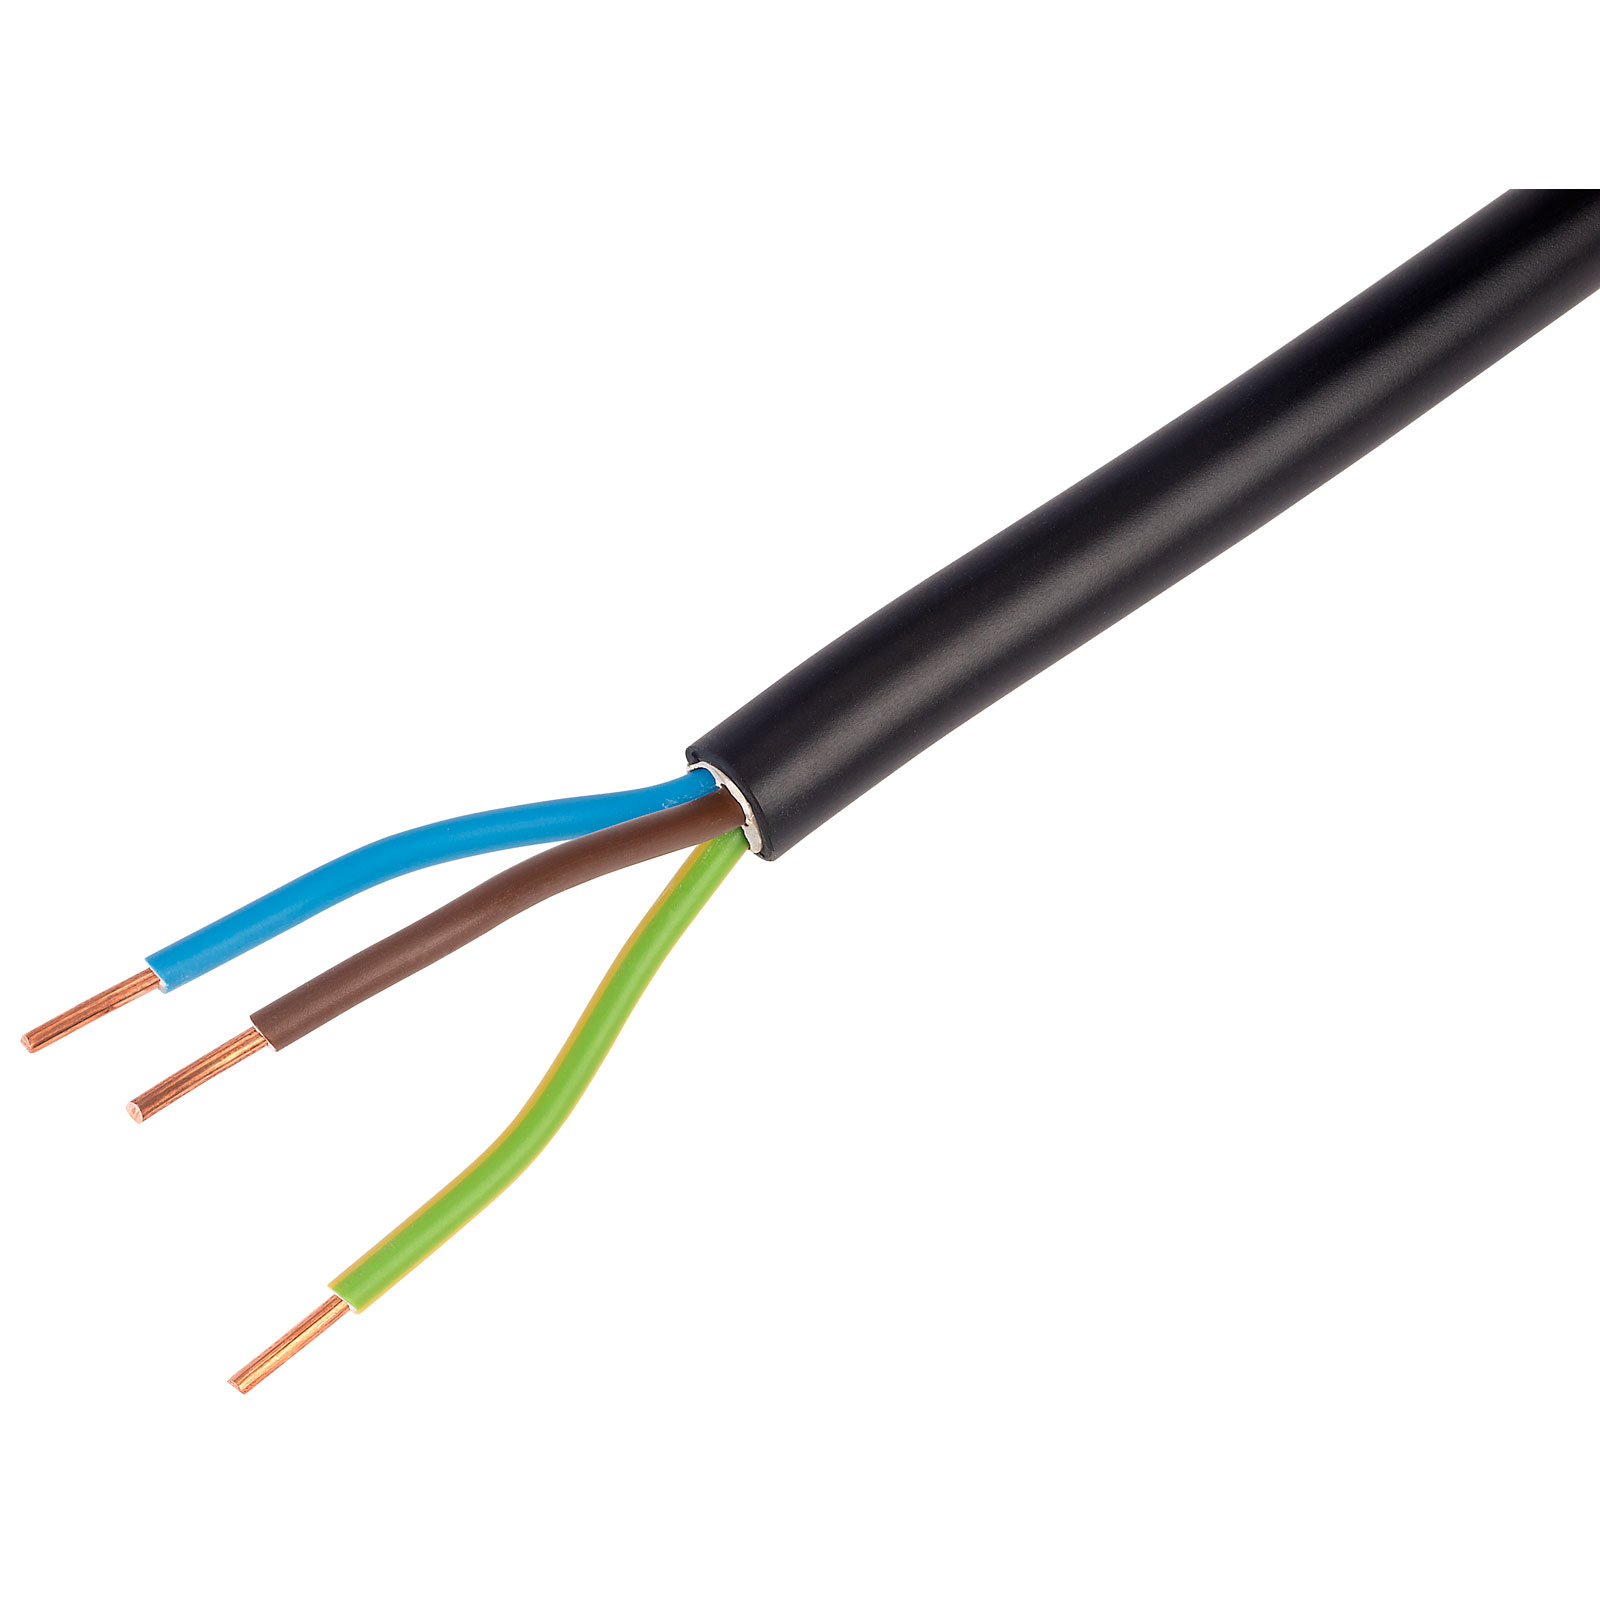 Nyy-j 3G4.0 mm2 Insulated PVC Flexible Rubber Cable Professional Best Price PVC Power Cable 